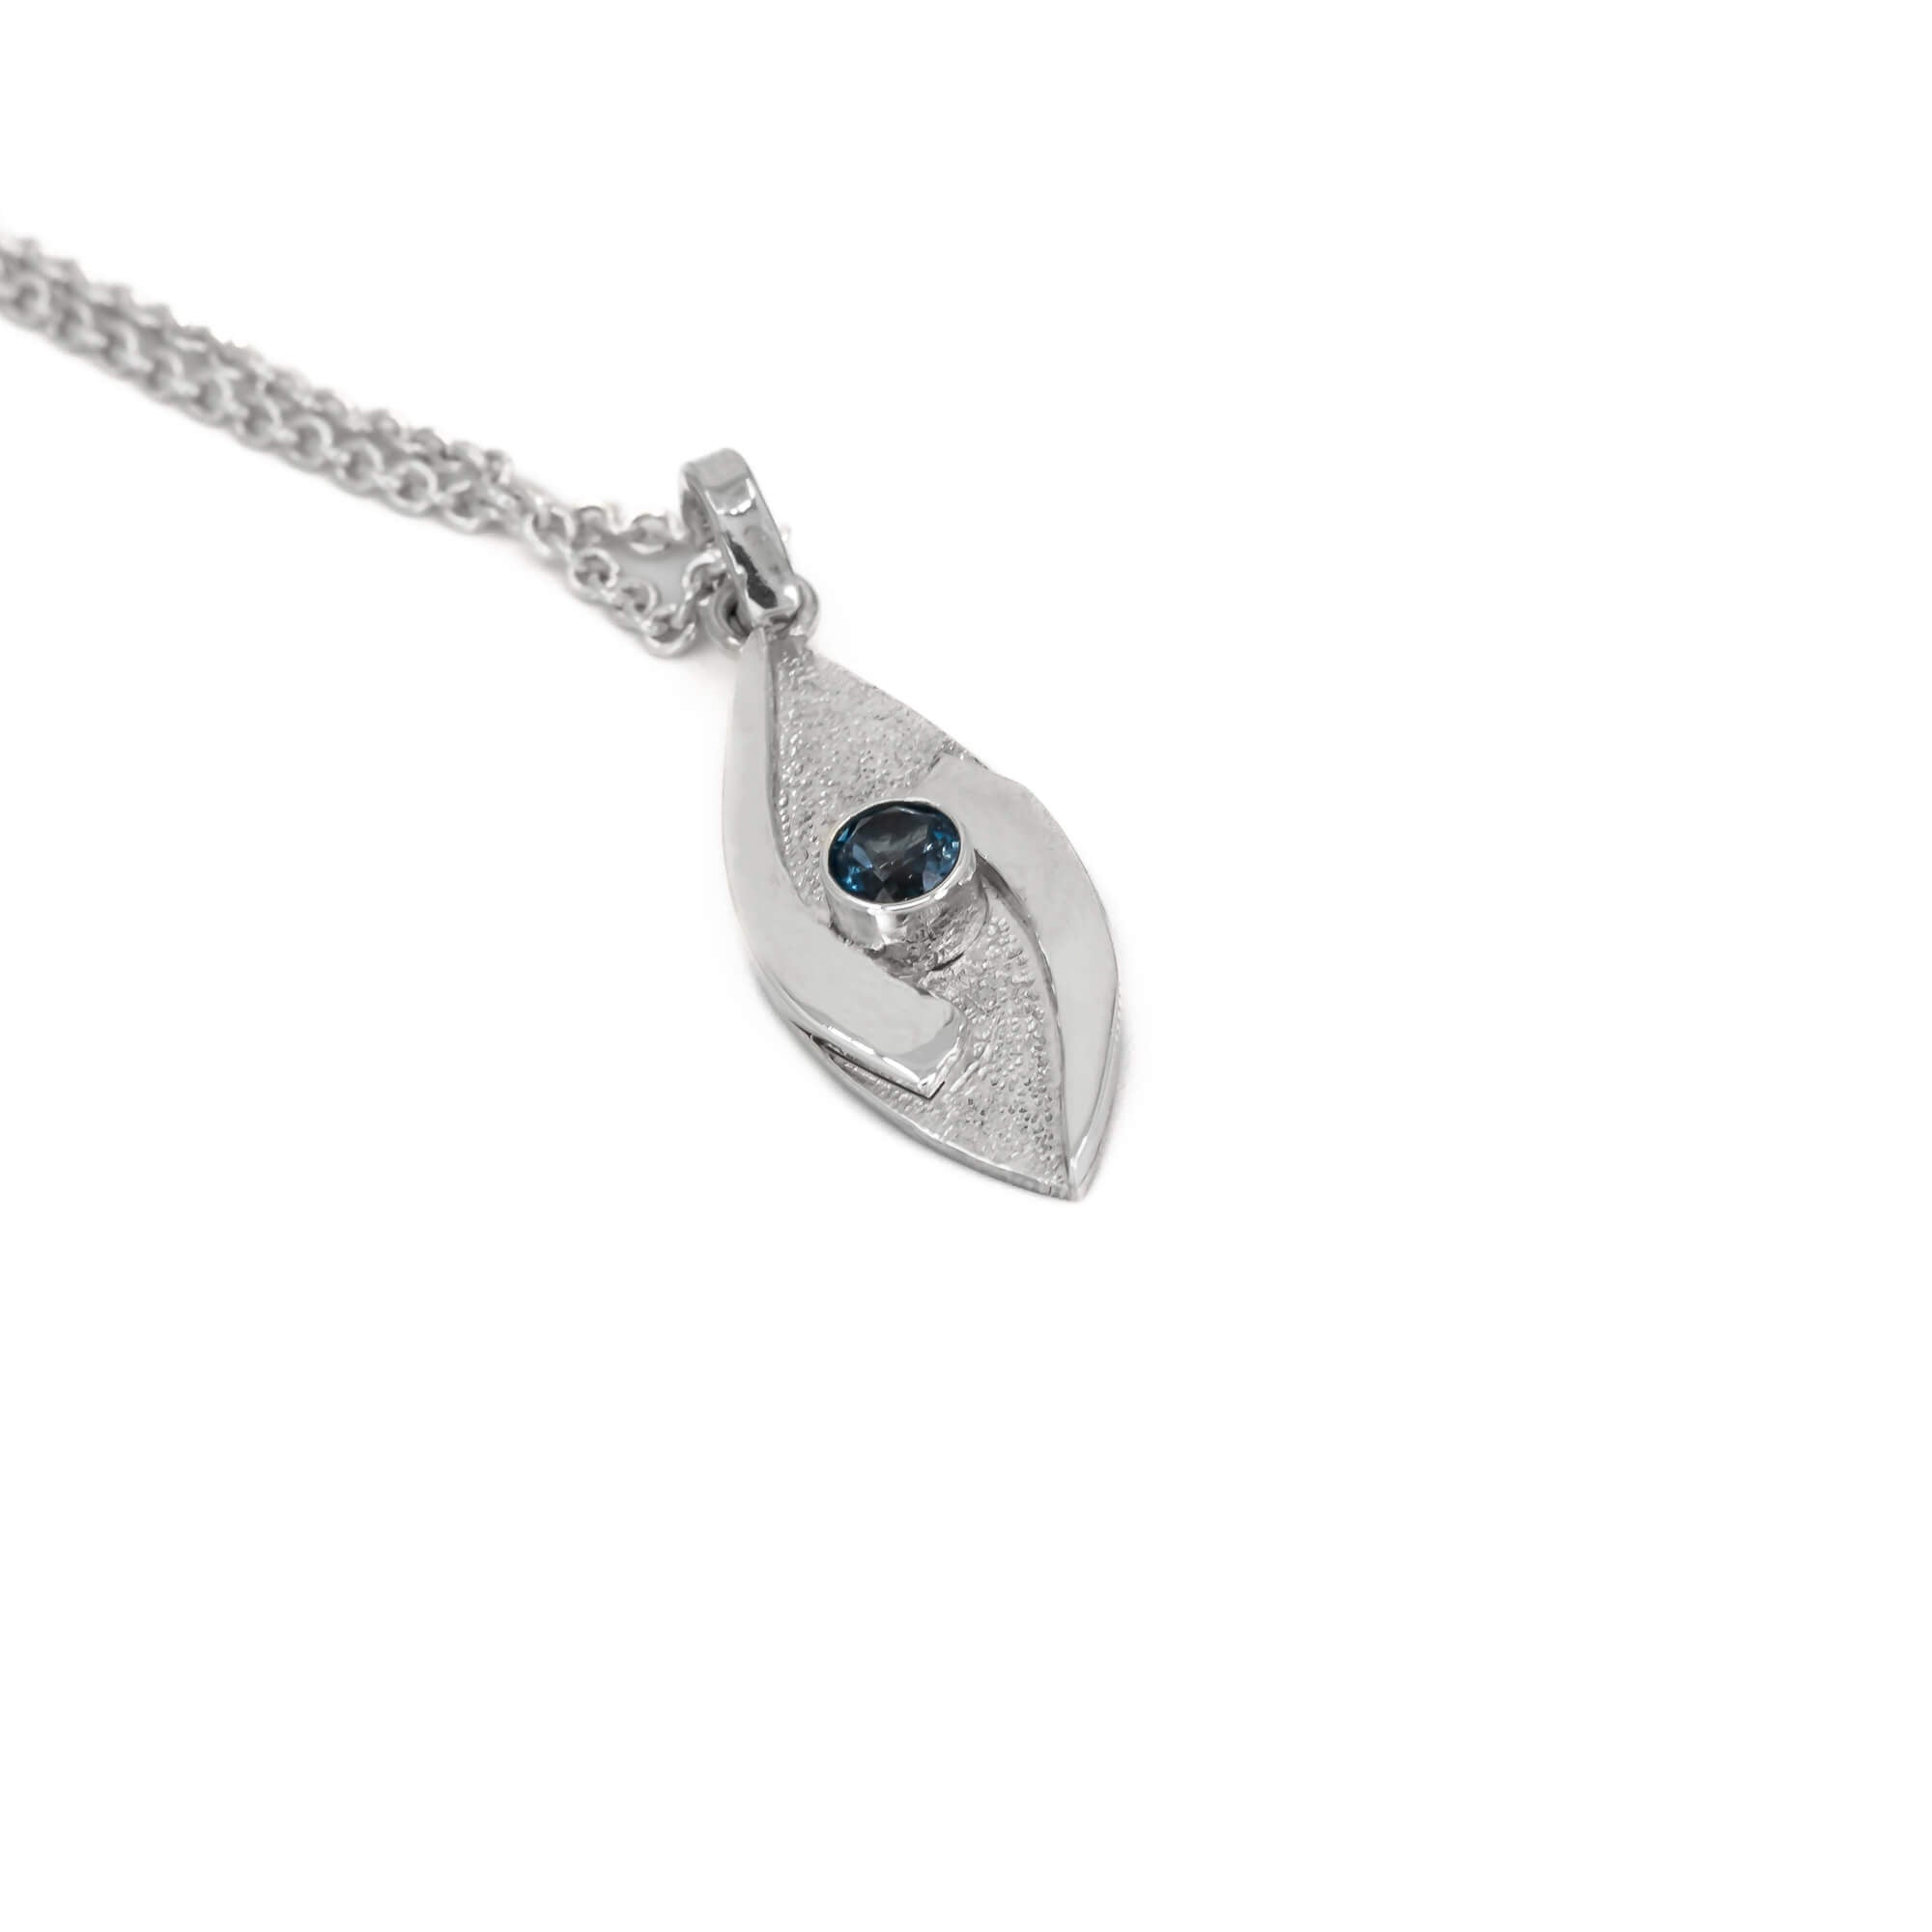 small hugged pendant necklace in sterling silver with a stardust texture and a 4mm London Blue Topaz faceted stone side view